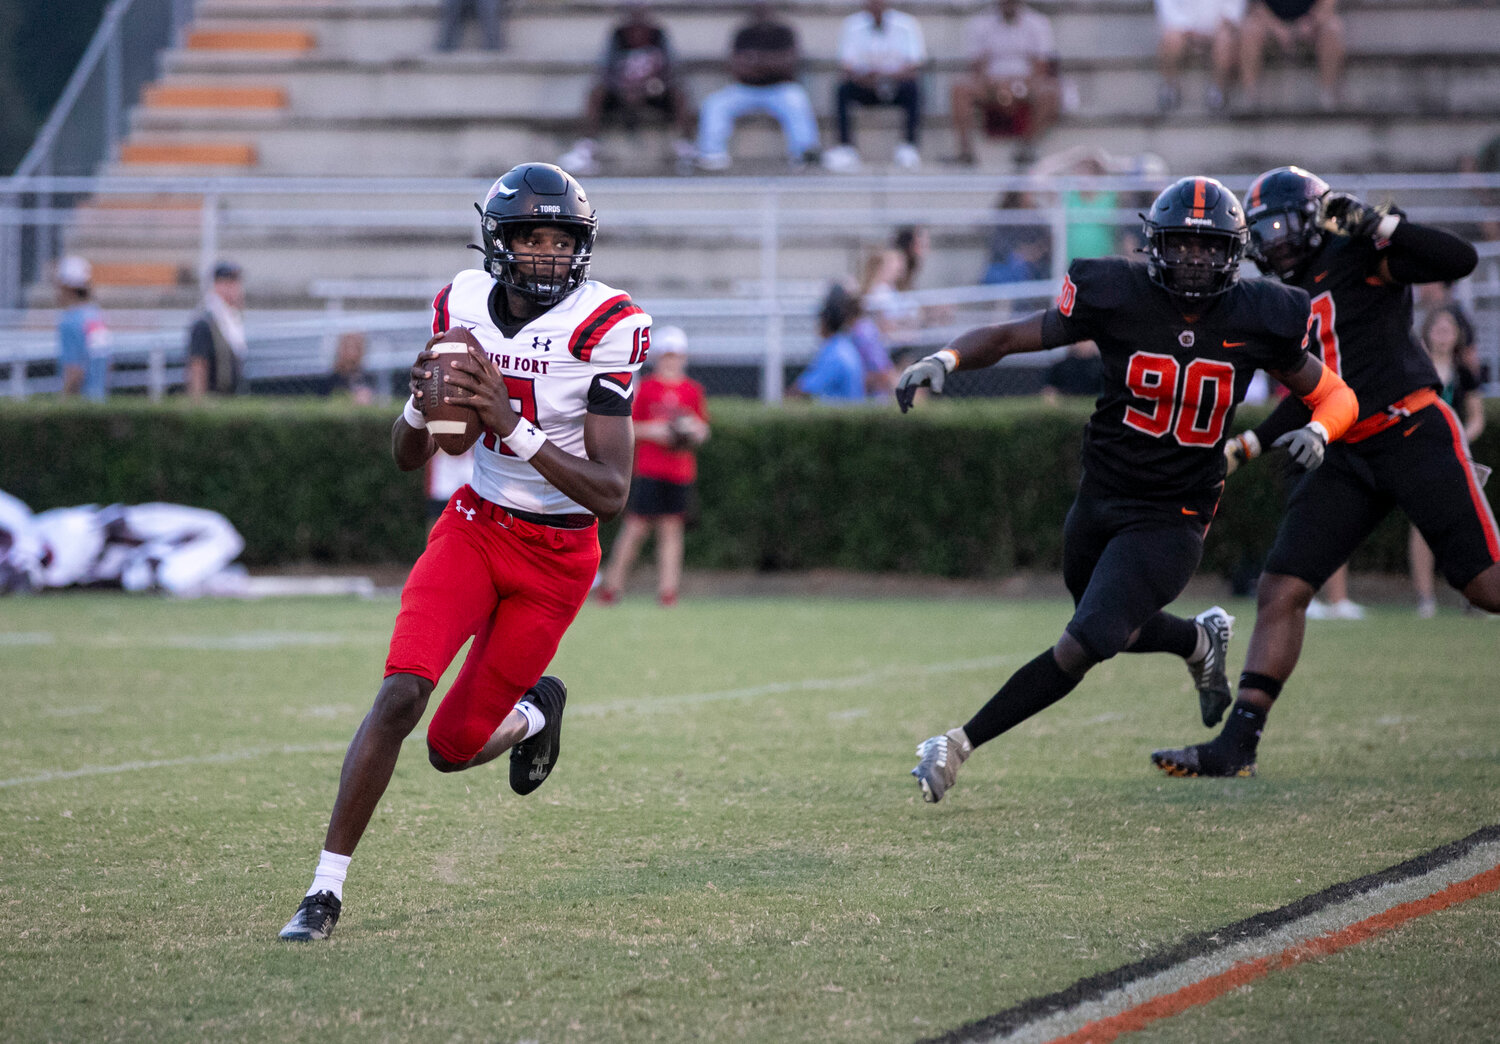 Toro sophomore quarterback Aaden Shamburger rolls out of the pocket during the first half of Spanish Fort’s Class 6A Region 1 game against the Baldwin County Tigers on the road Friday, Sept. 8. Shamburger opened the scoring with a 2-yard touchdown rush just before halftime.